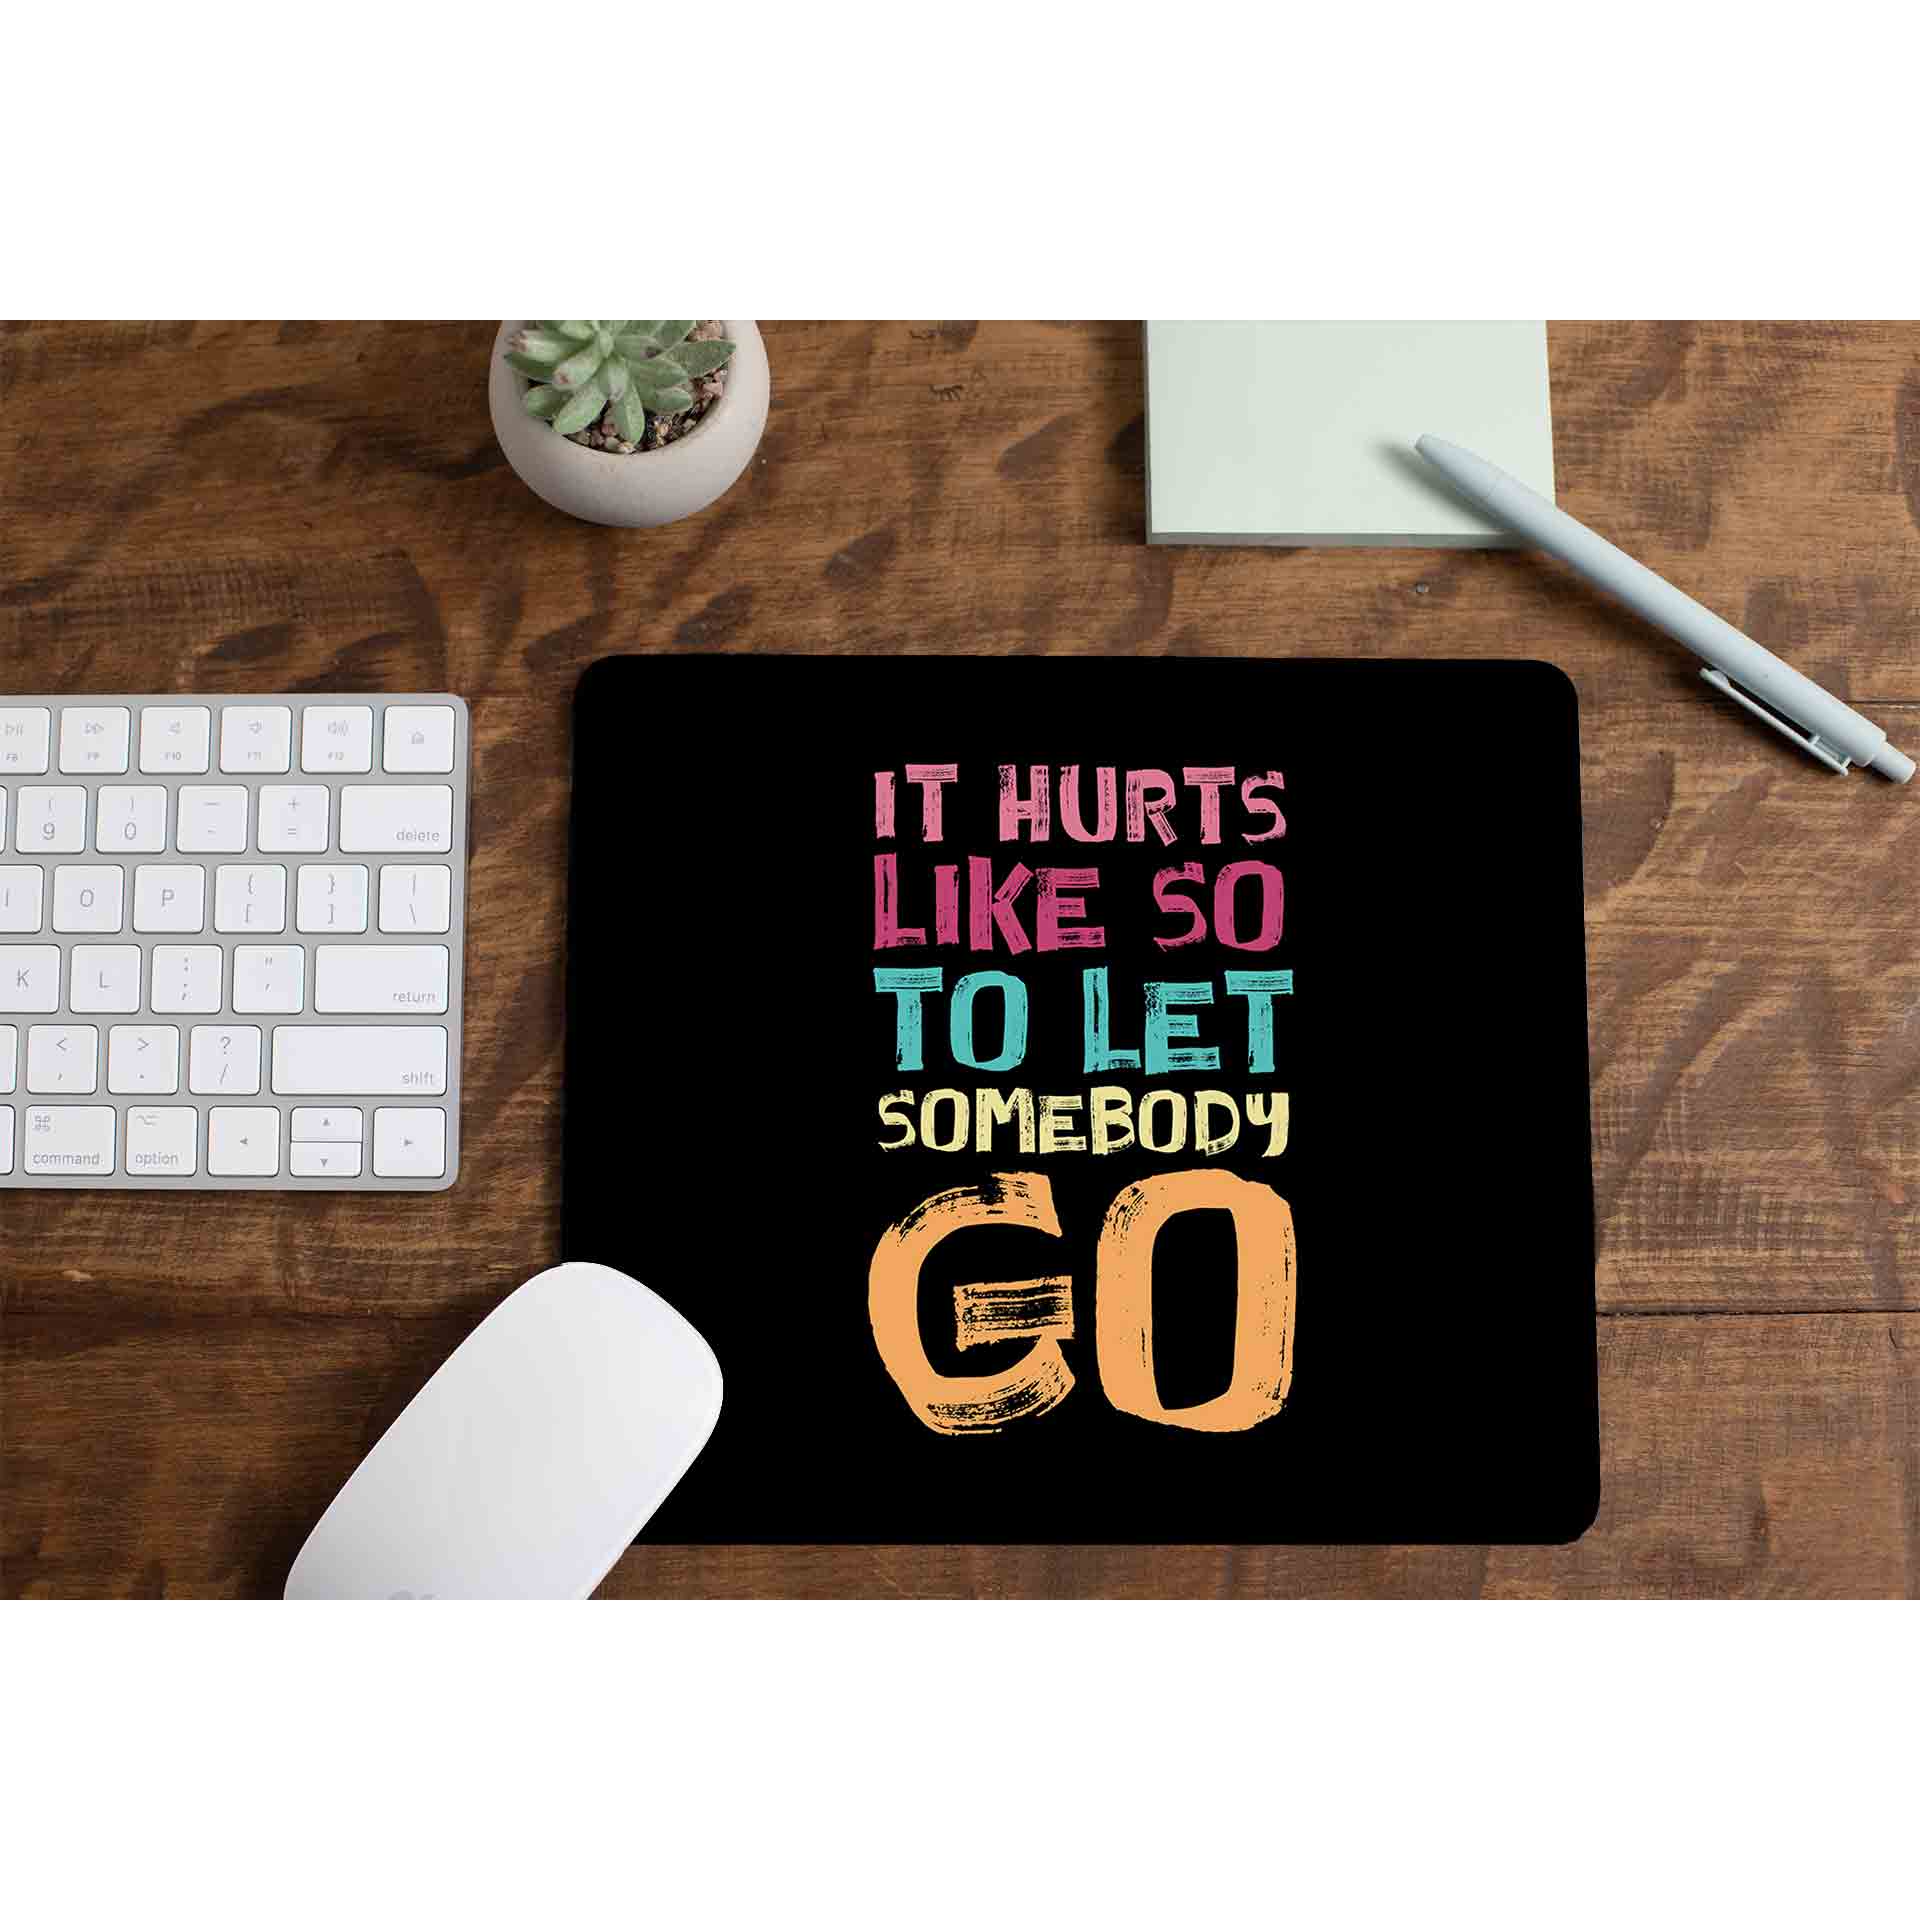 coldplay let somebody go mousepad logitech large anime music band buy online united states of america usa the banyan tee tbt men women girls boys unisex